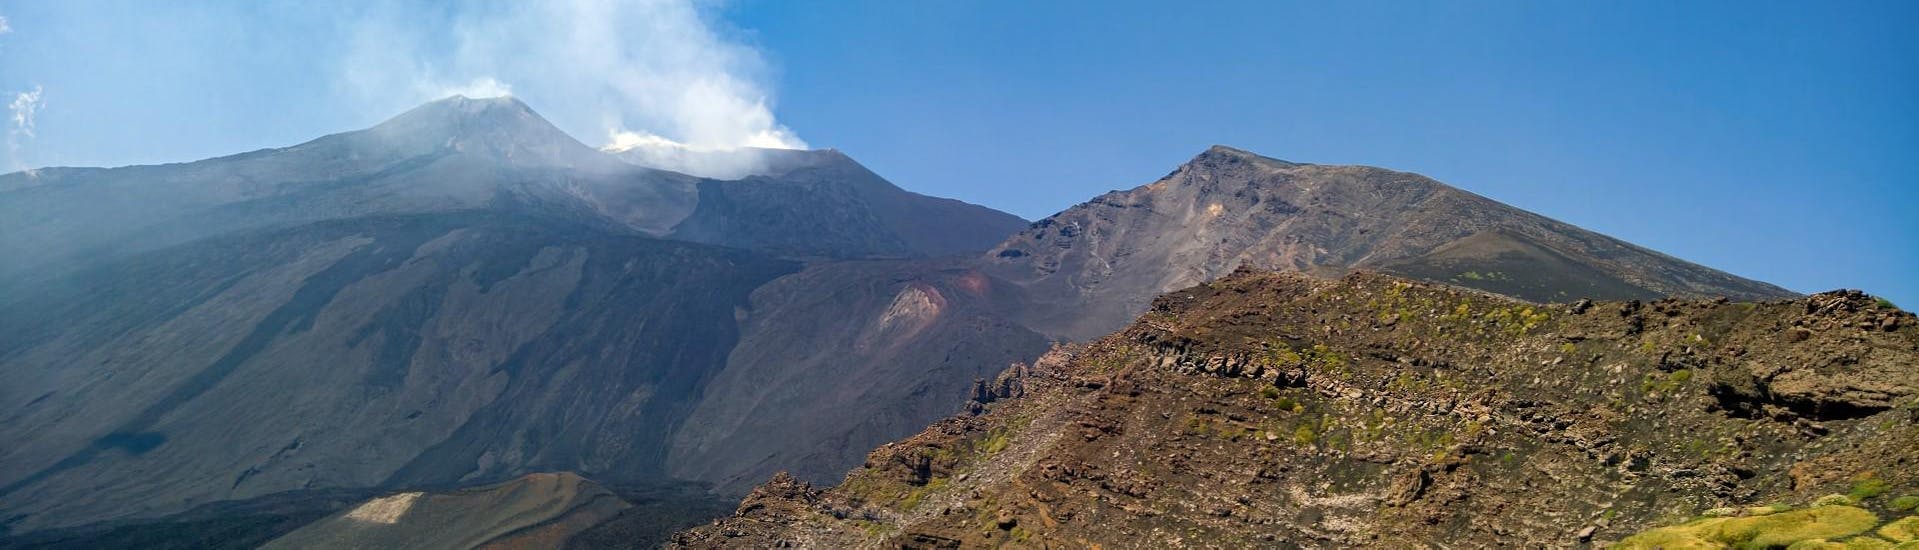 View of the top of Etna with clear sky in the background during a trip with Etna & Sea Excursions Catania.